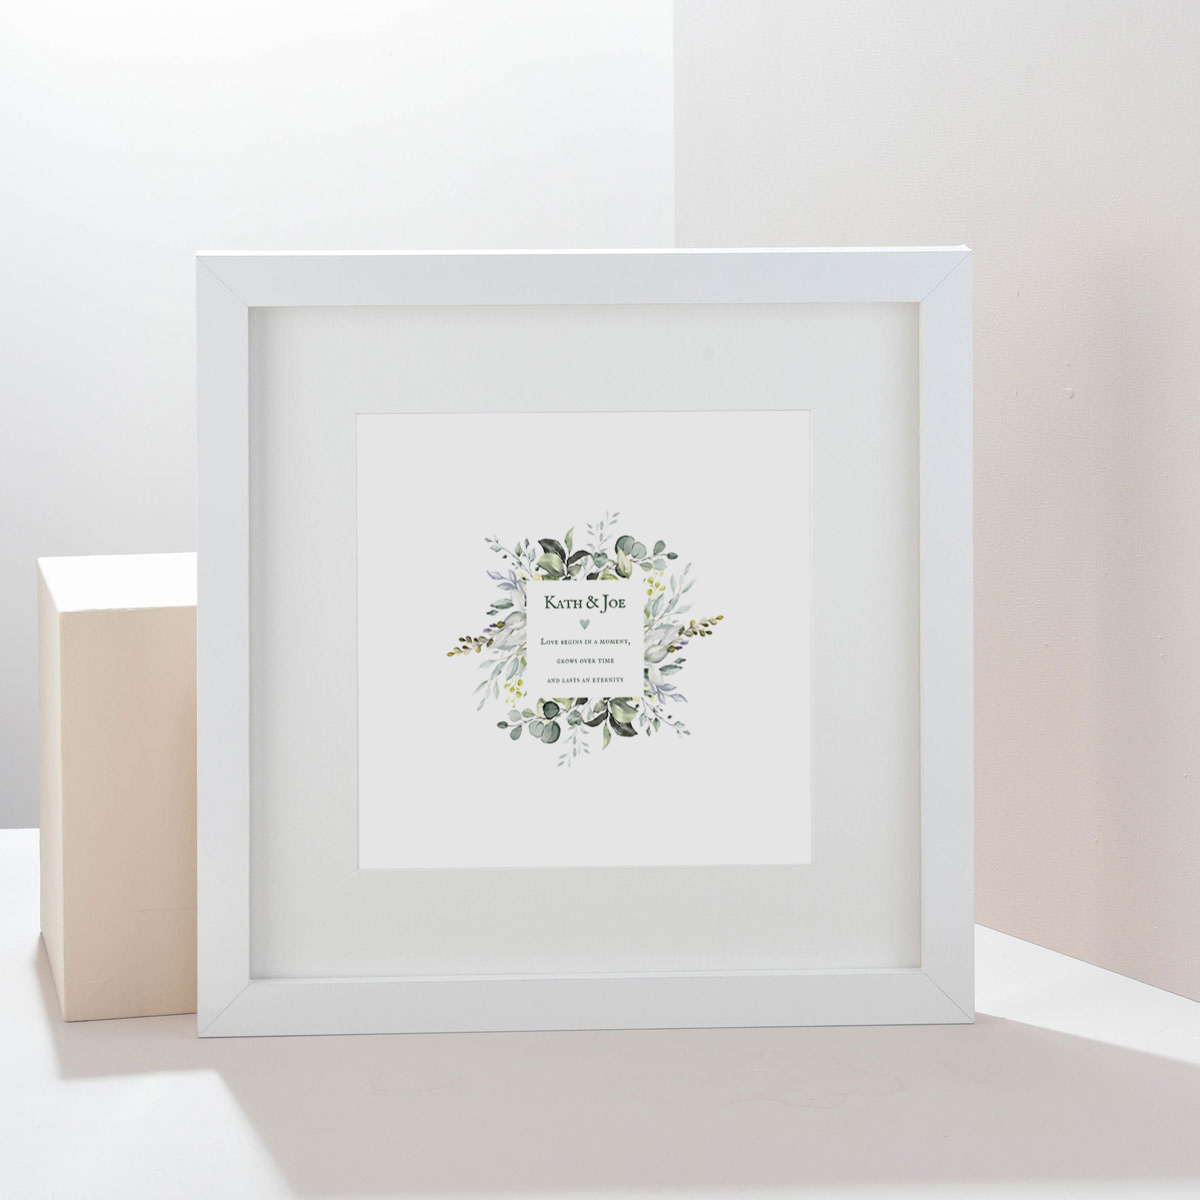 Personalised Names Love Begins in a Moment  Square Print